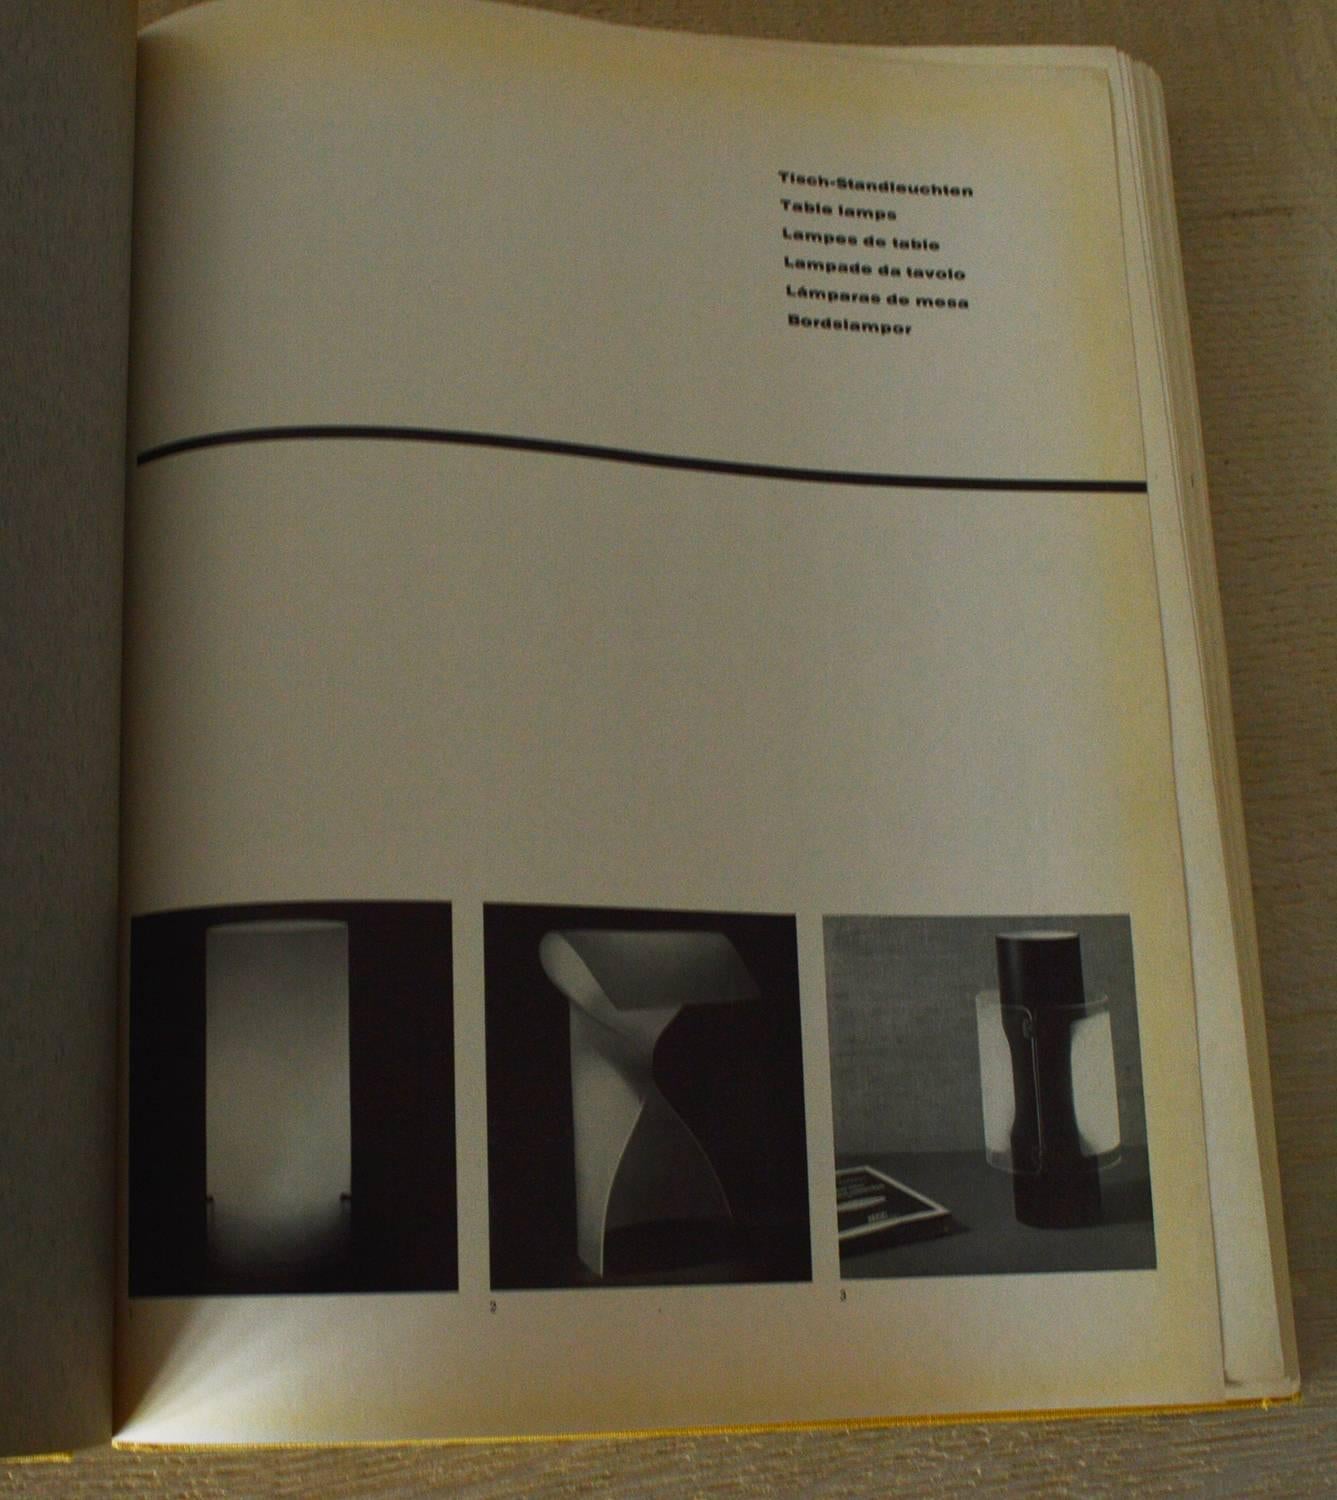 German Mid-Century Lamps and Lighting Reference Book, 1962